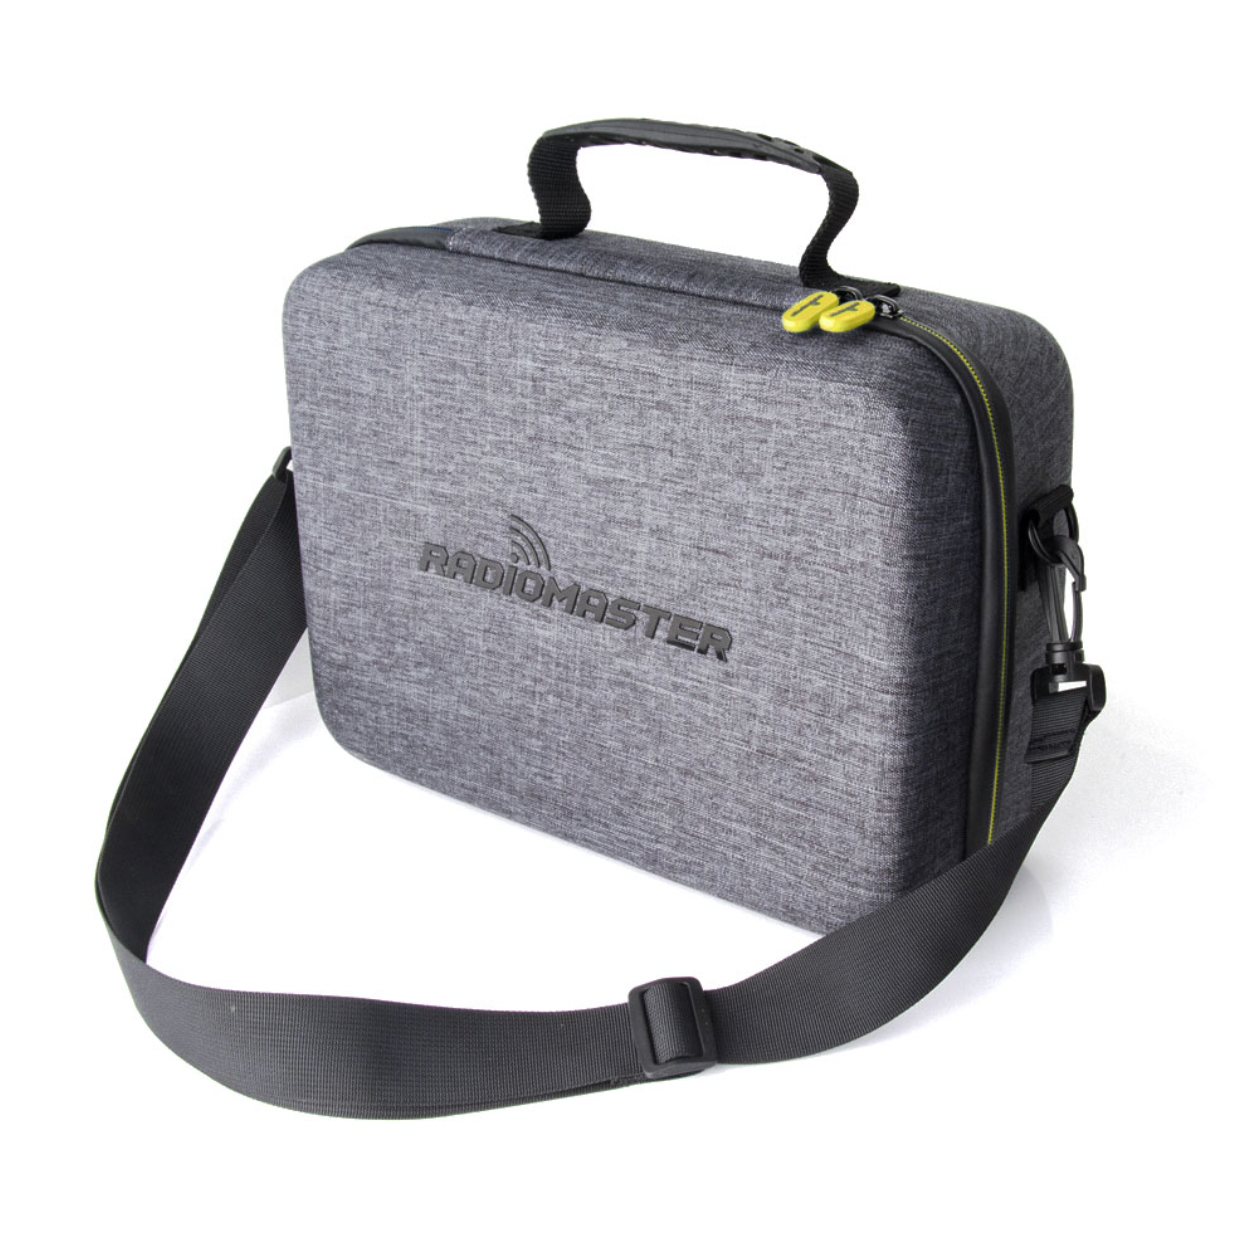 RadioMaster Fabric EVA Carrying Protection Case for TX16S Transmitter (Large)